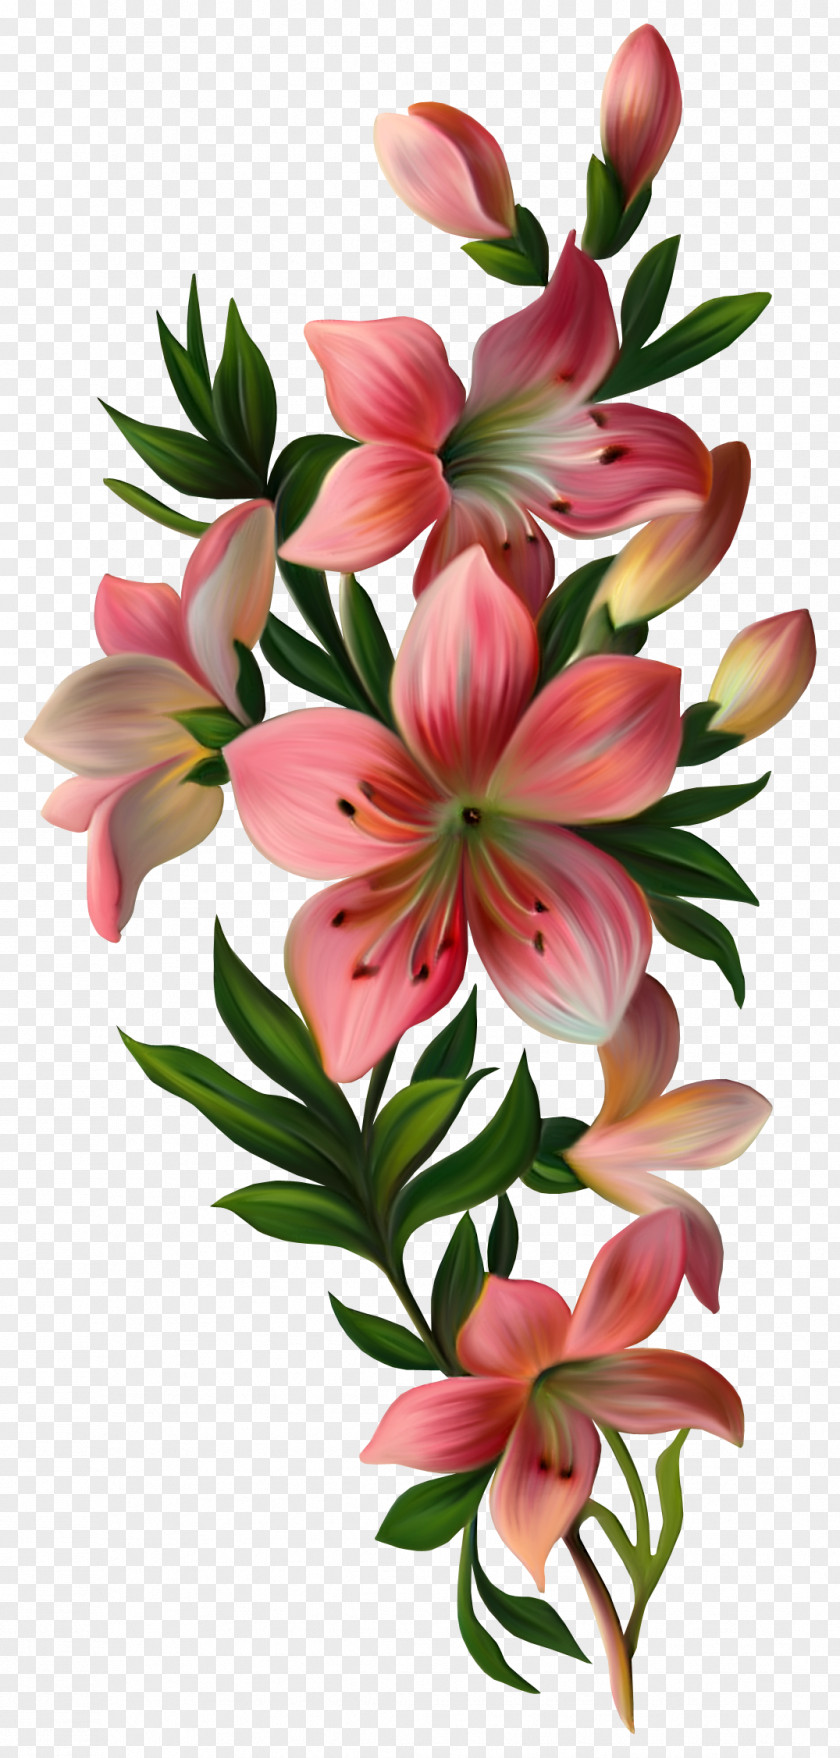 Lily Flower Vintage Clothing Clip Art PNG